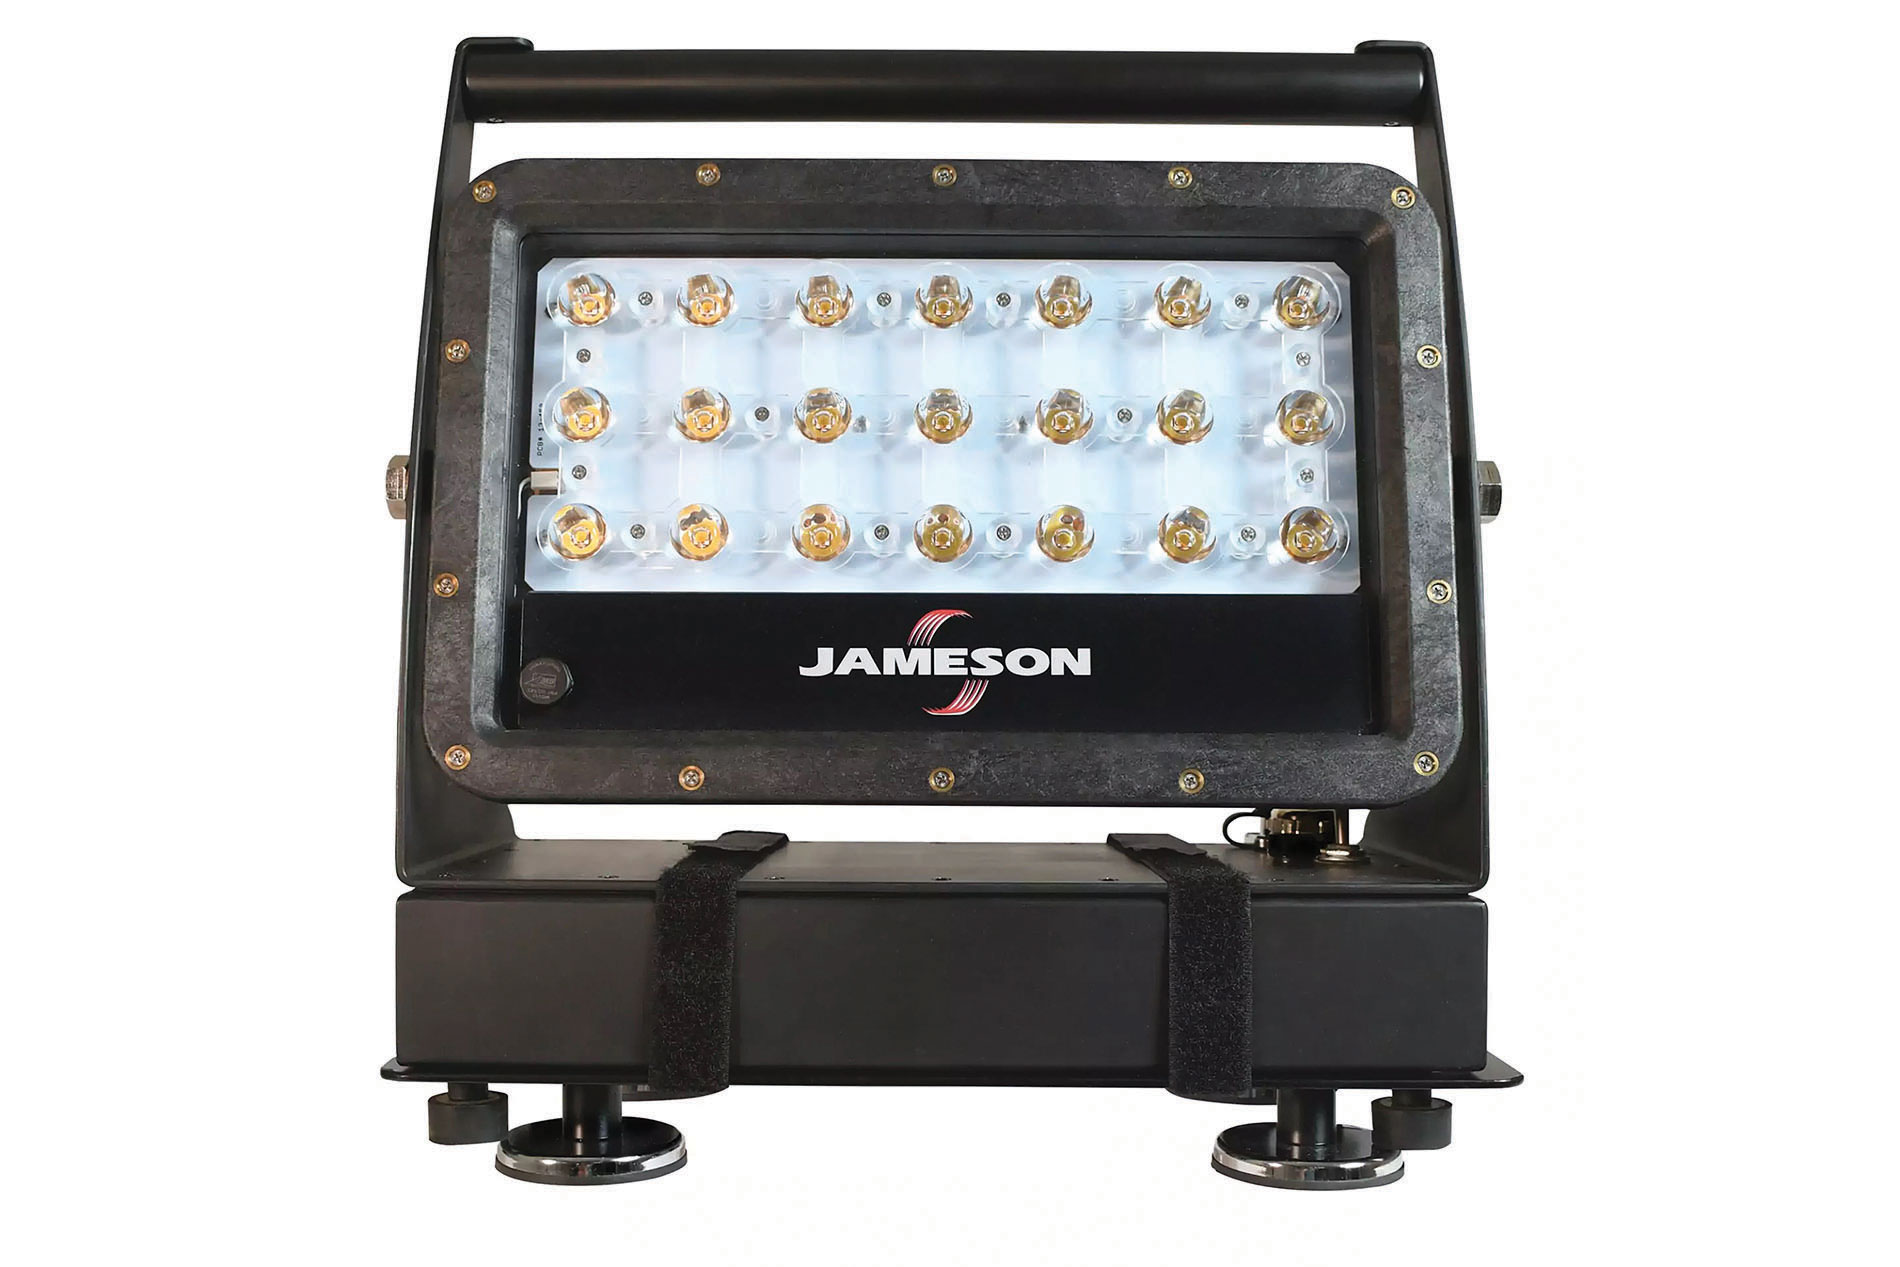 Black floodlight with a handle and the Jameson logo. Image by Jameson.